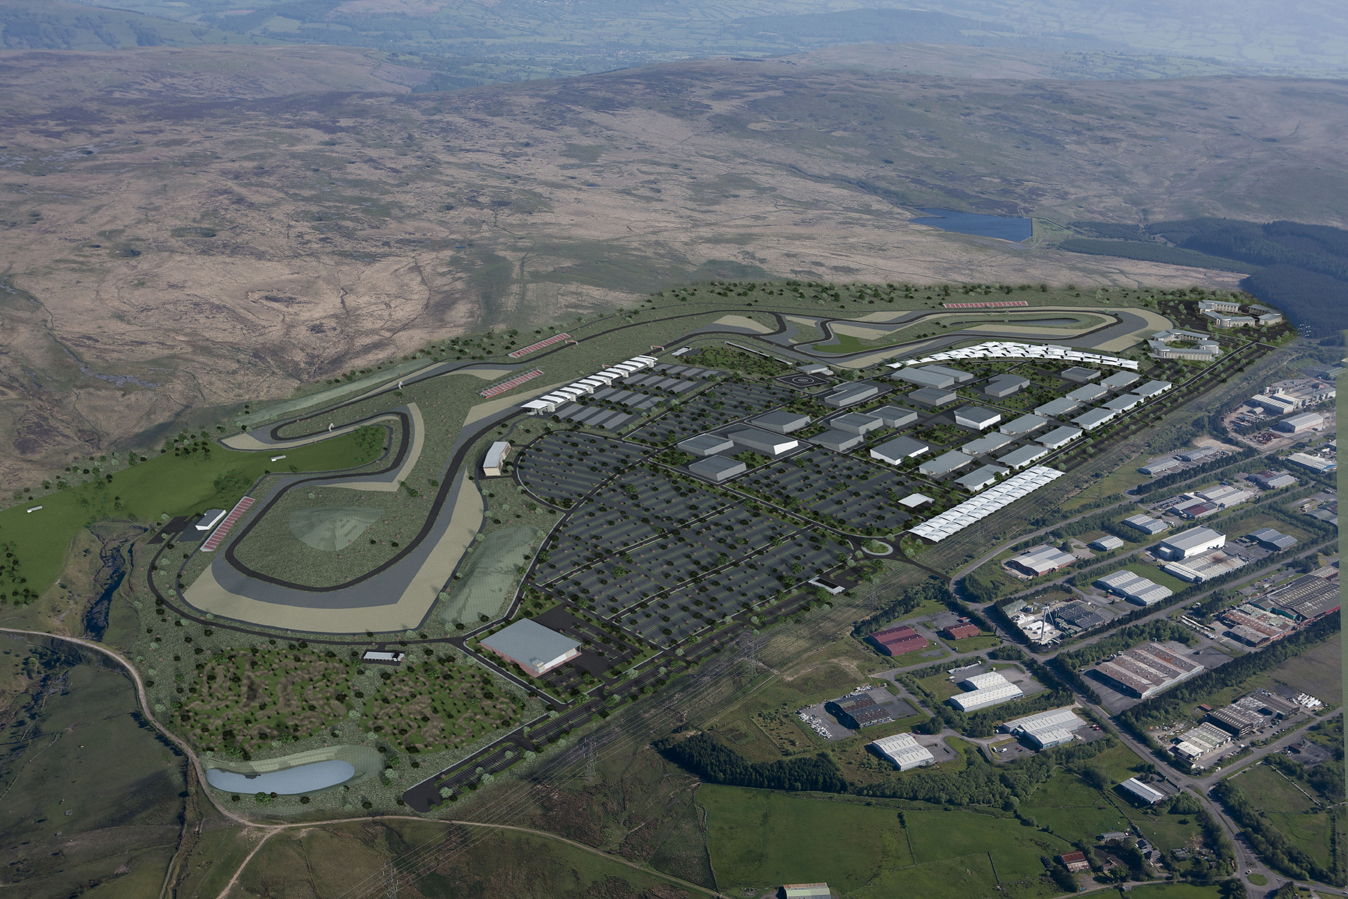 FCC and local partner Griffiths to build Welsh race circuit for 310 million euro